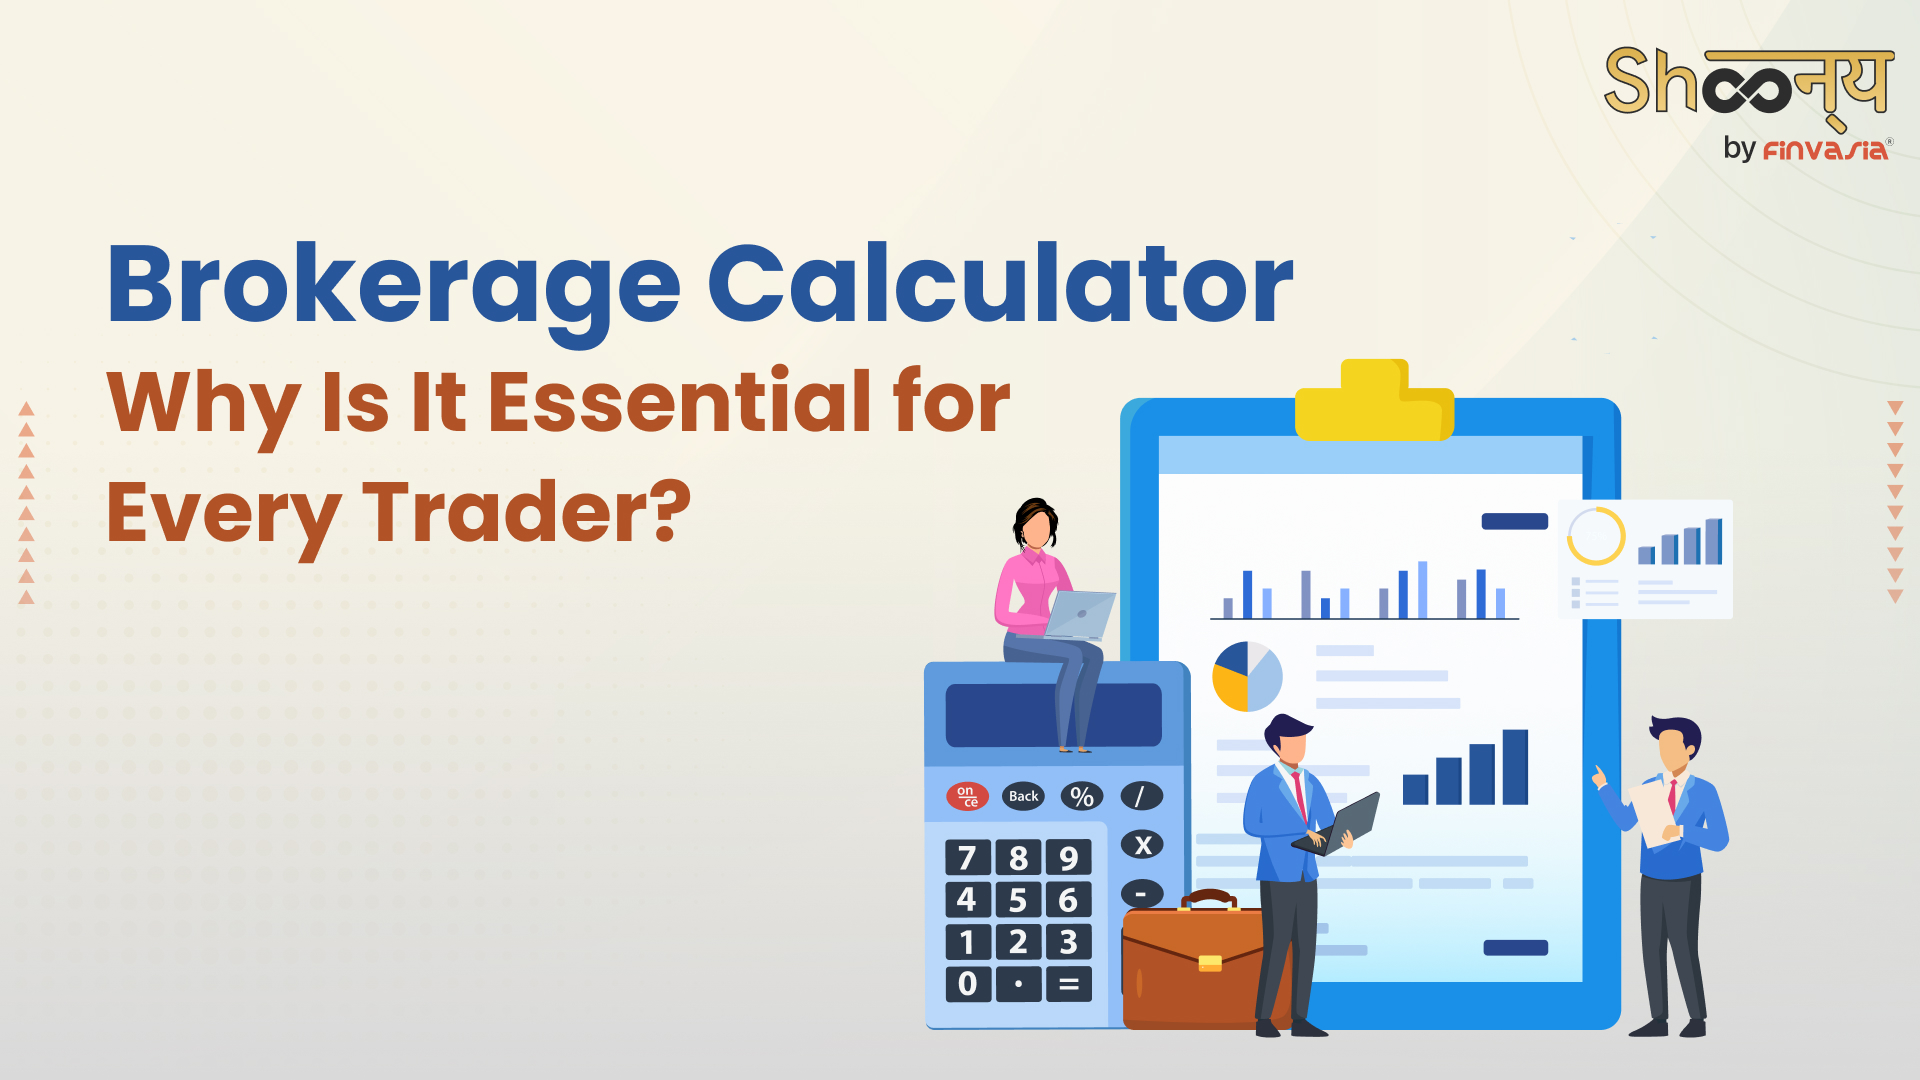 Brokerage Calculator: Why Is It Essential for Every Trader?